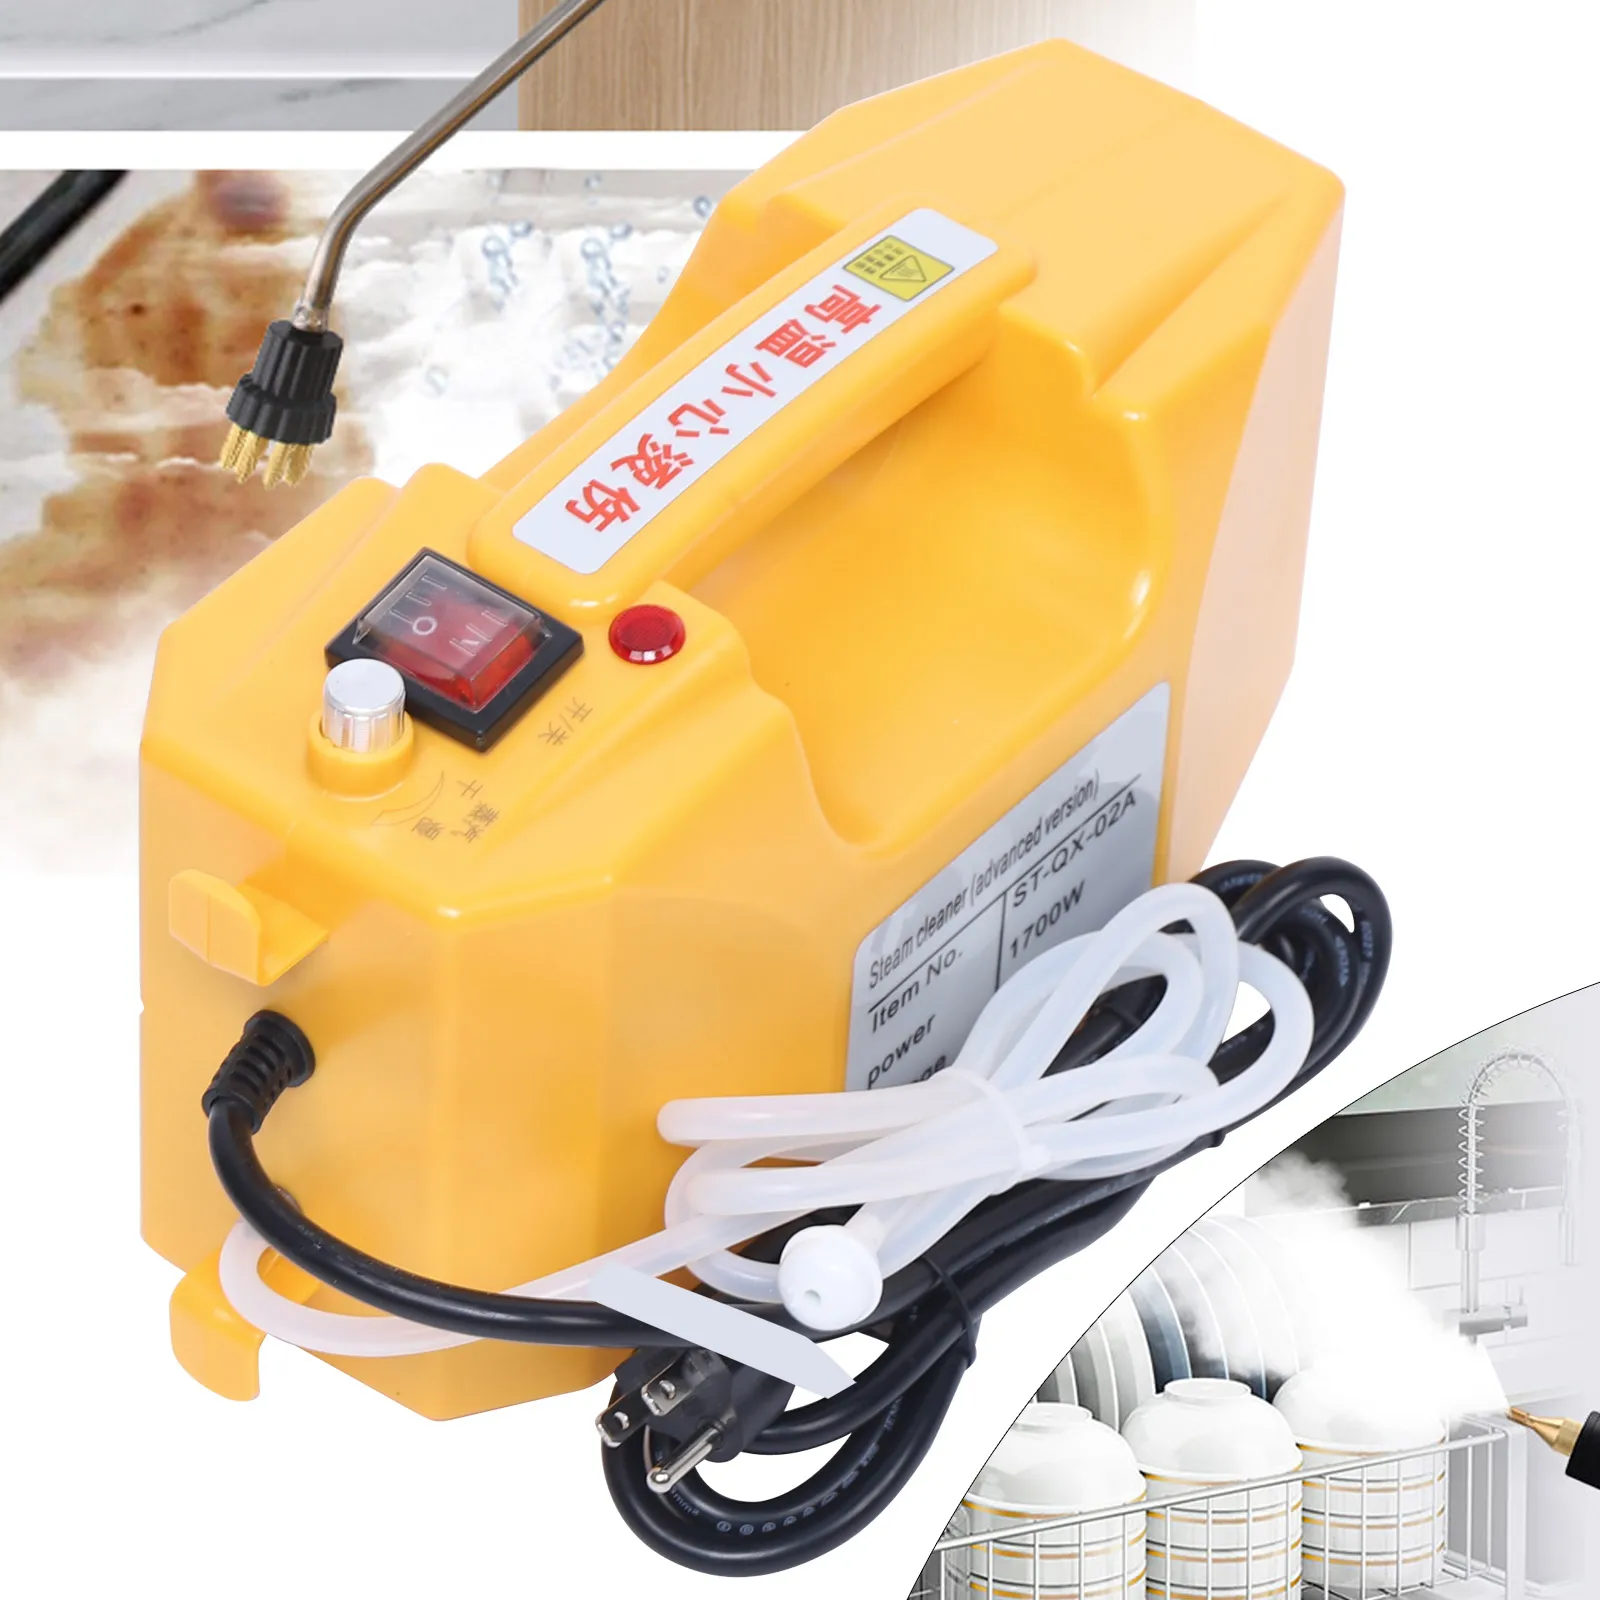 1600W High Temp Pressure Steam Cleaning Machine Household Handheld Car Detailing Cleaner Washing Tool Temperature Control 110V